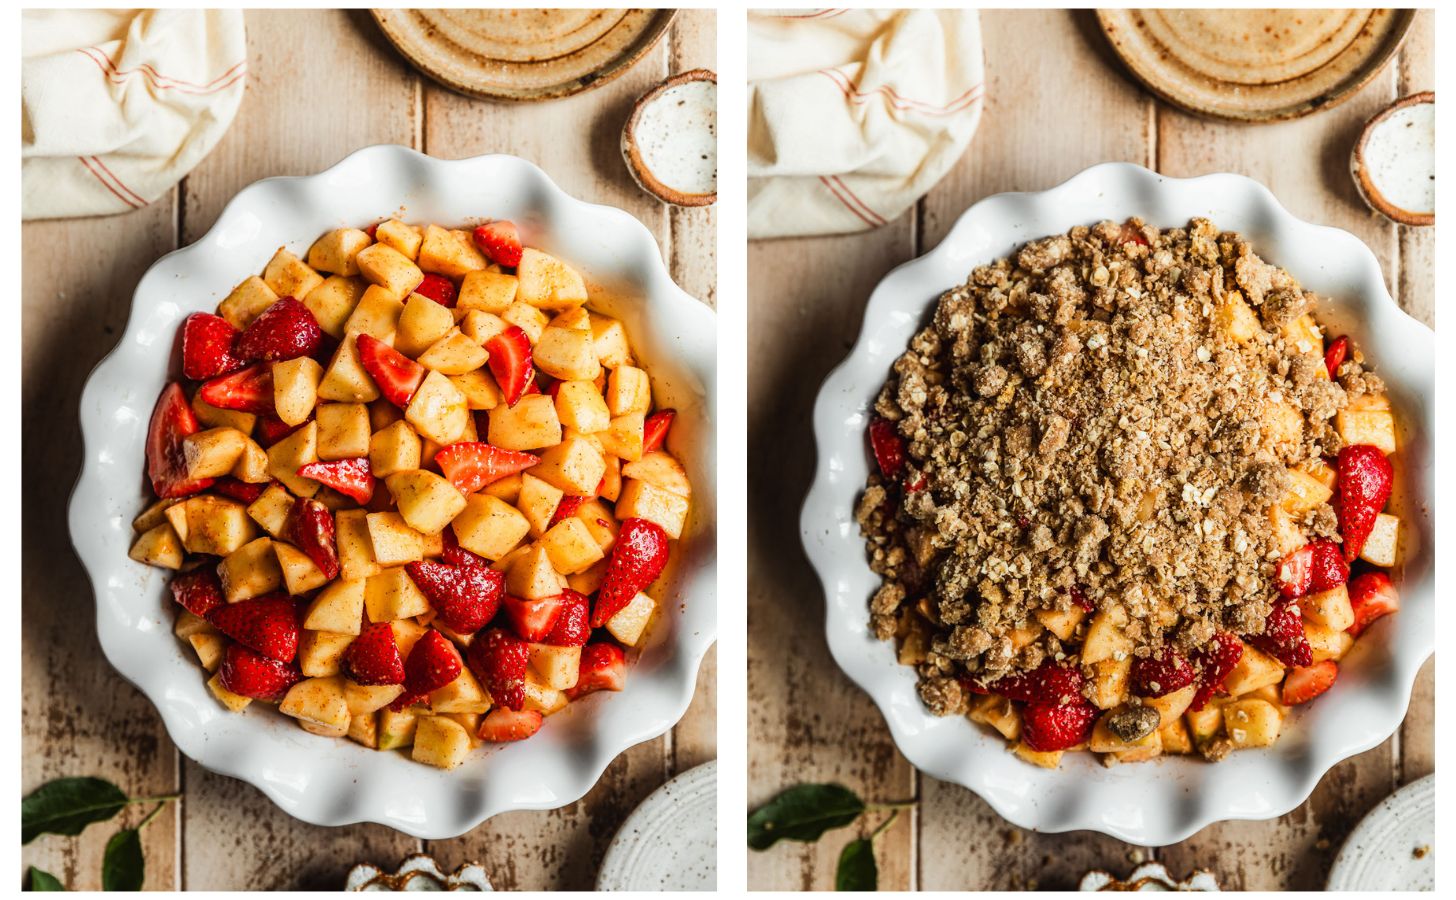 Two images making strawberry apple crisp. In photo 1, a white pie plate is filled with strawberry and apple filling on a wood table next to brown and white bowls. In photo 2, the filling is topped with streusel.